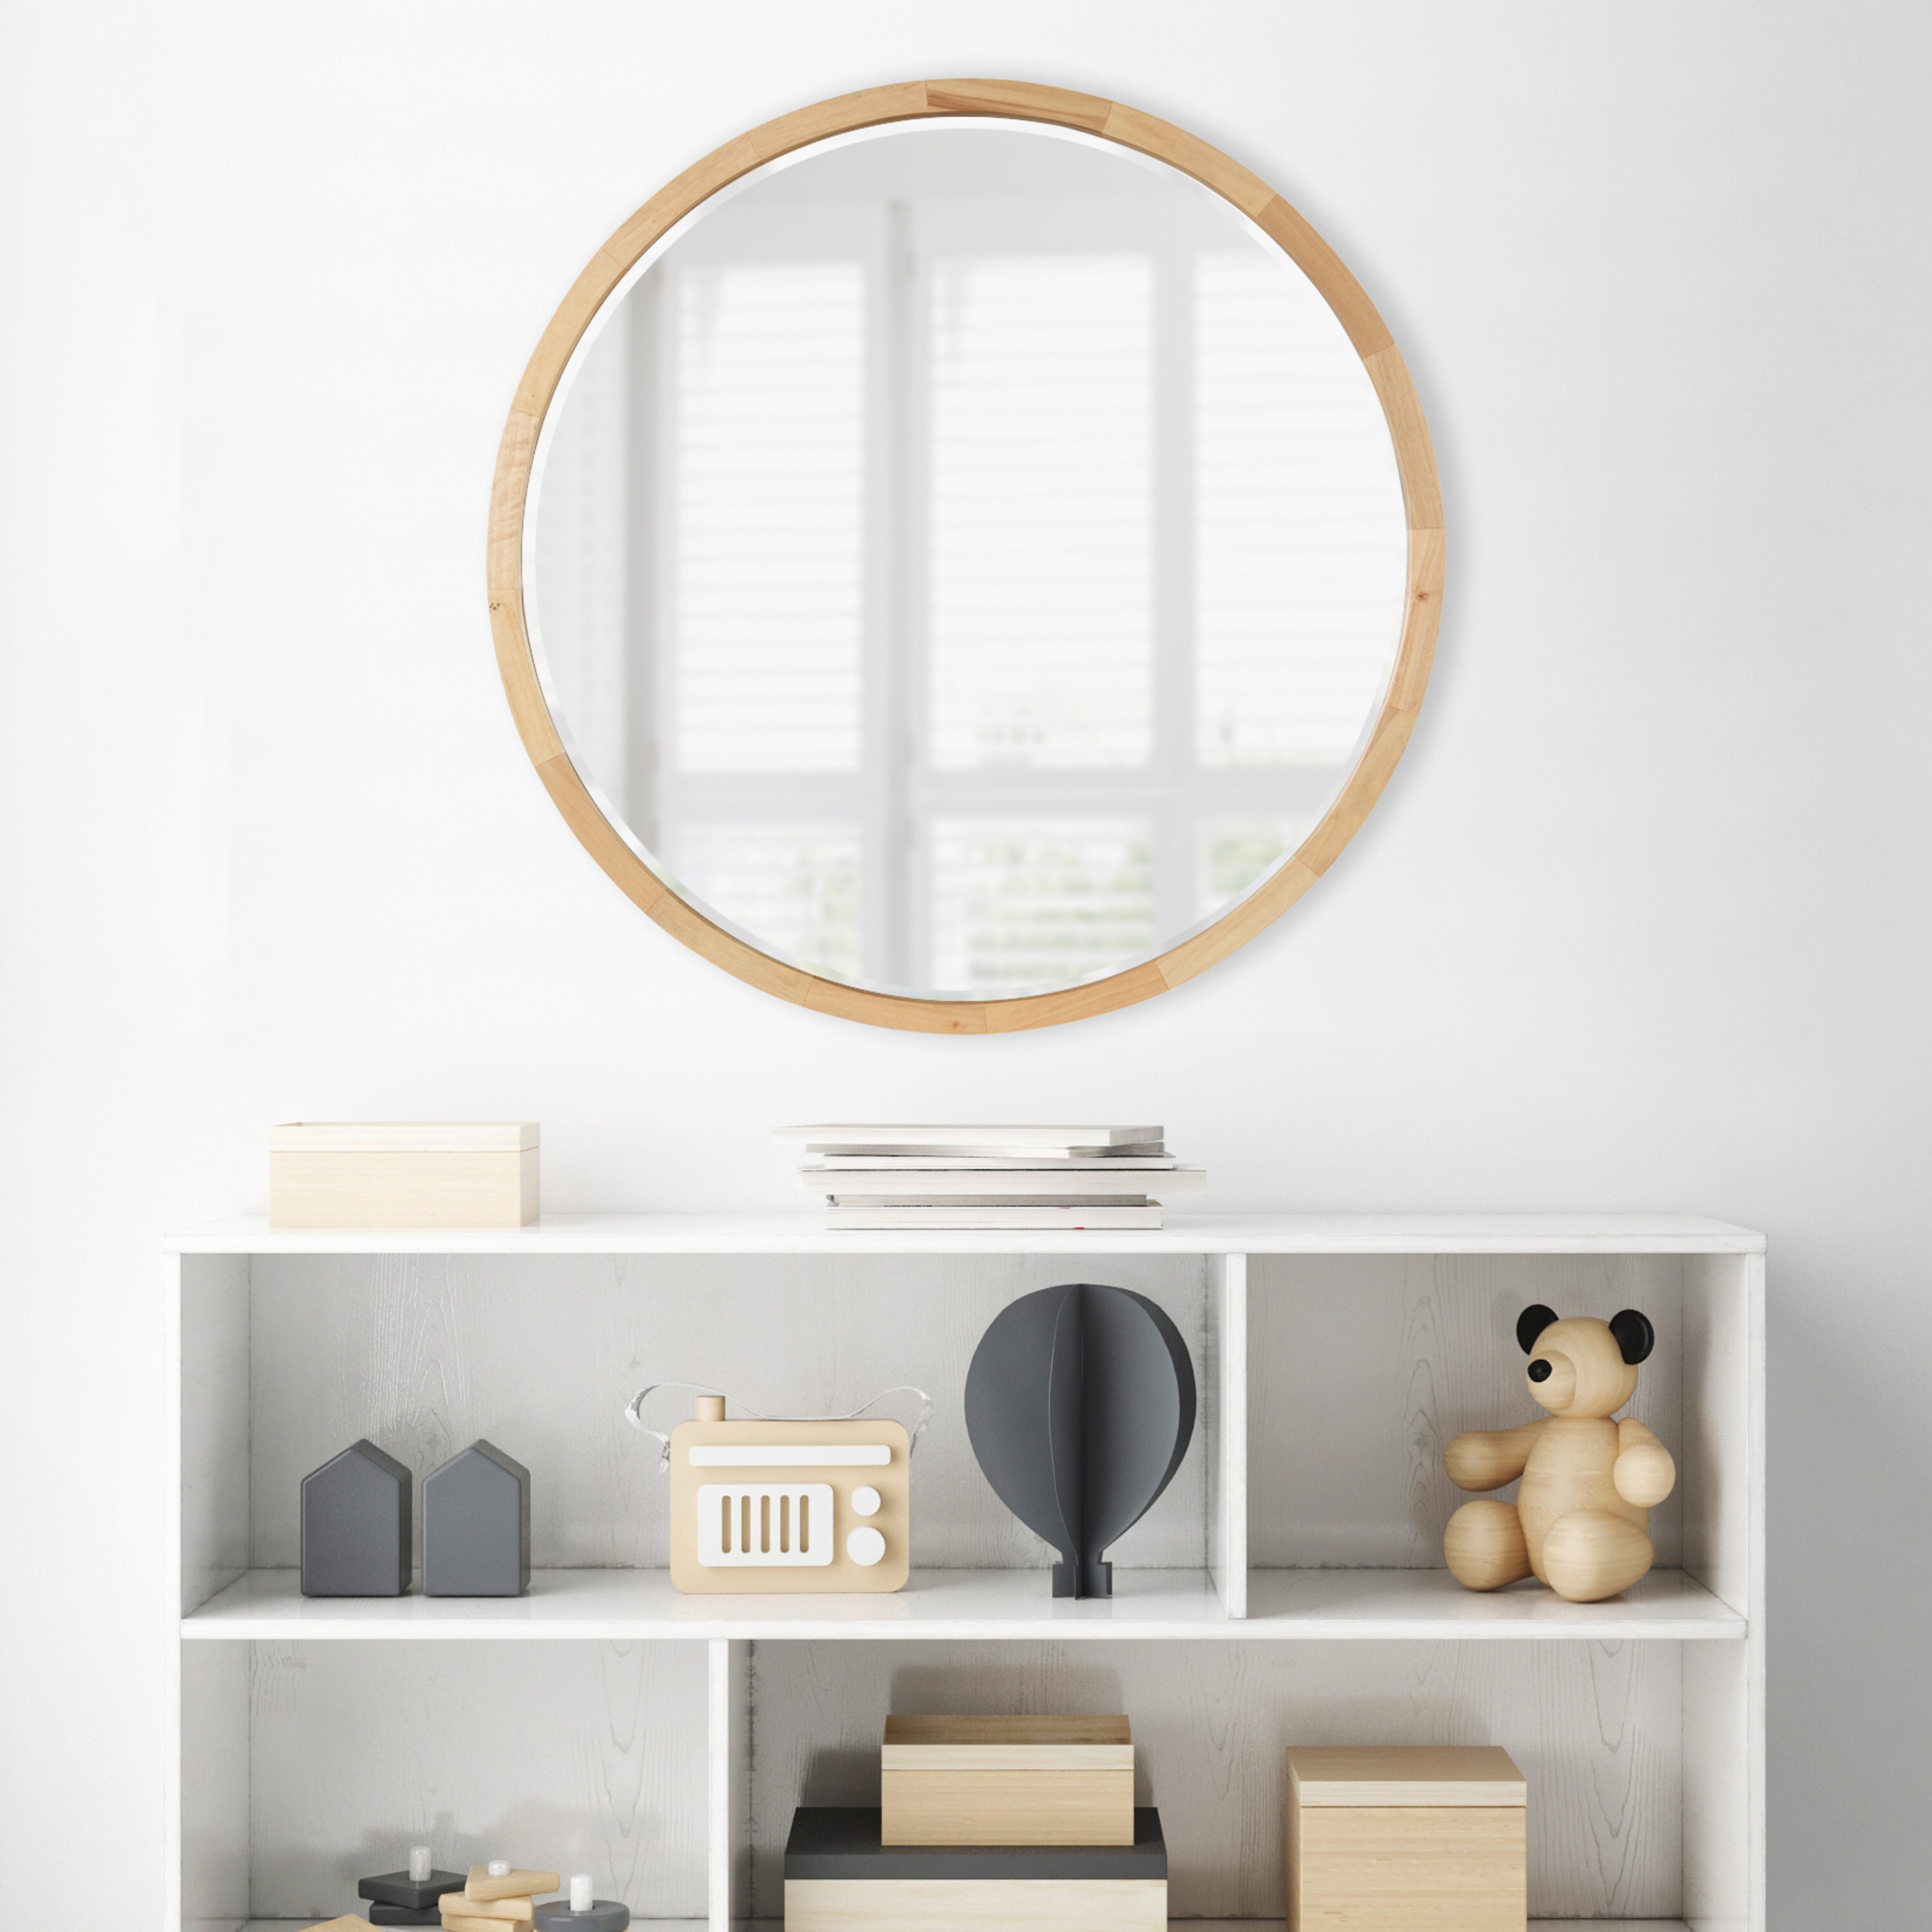 Kate and Laurel Norlund 28-in W x 28-in H Round Natural Framed Wall Mirror